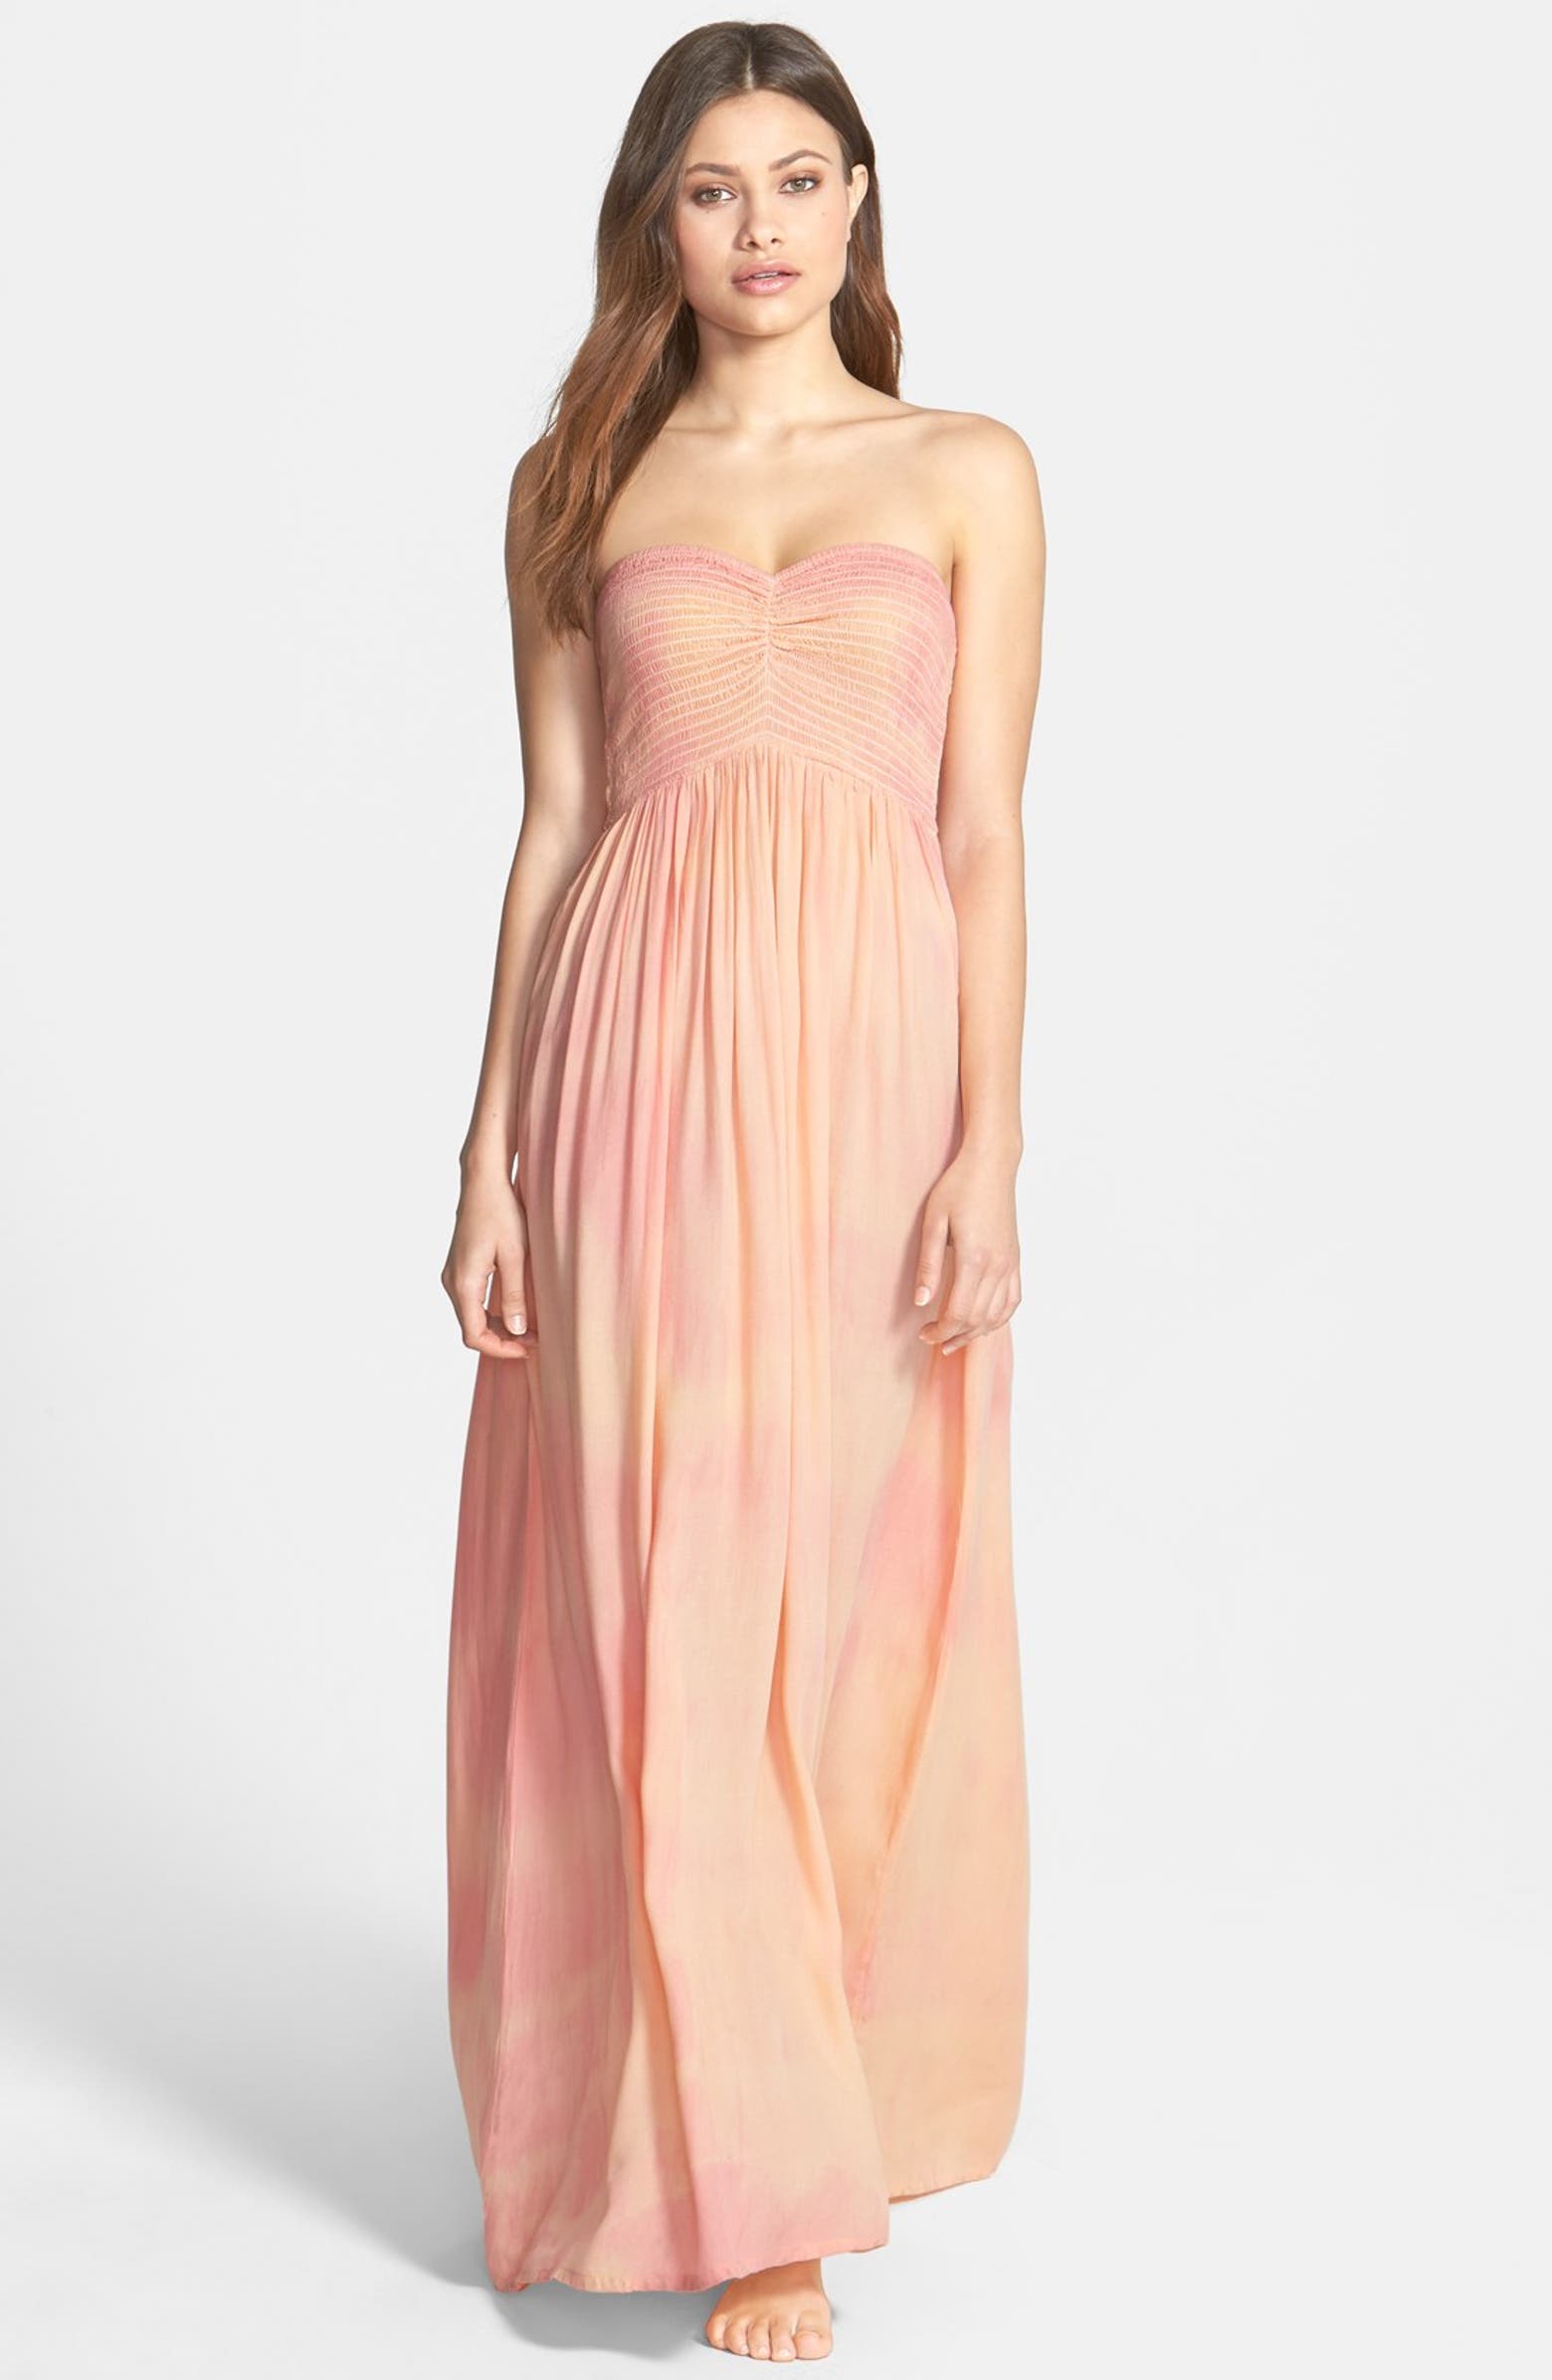 O'Neill 'Tory' Strapless Smocked Cover-Up Maxi Dress | Nordstrom